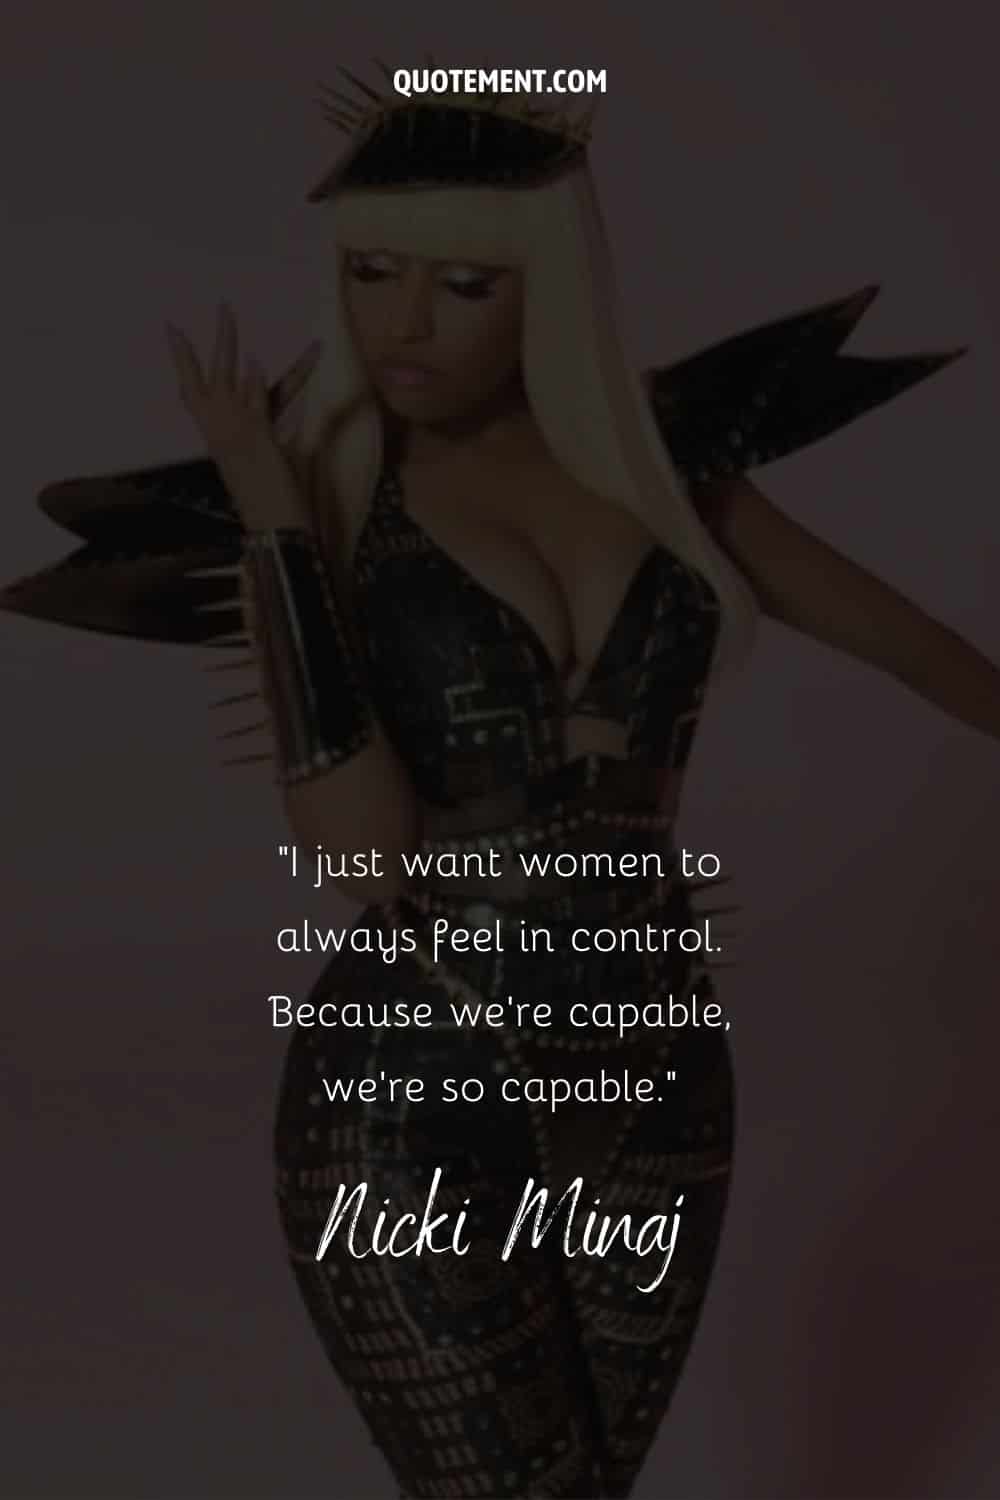 Inspiring quote for women by Nicki Minaj, and her photo in the background as well